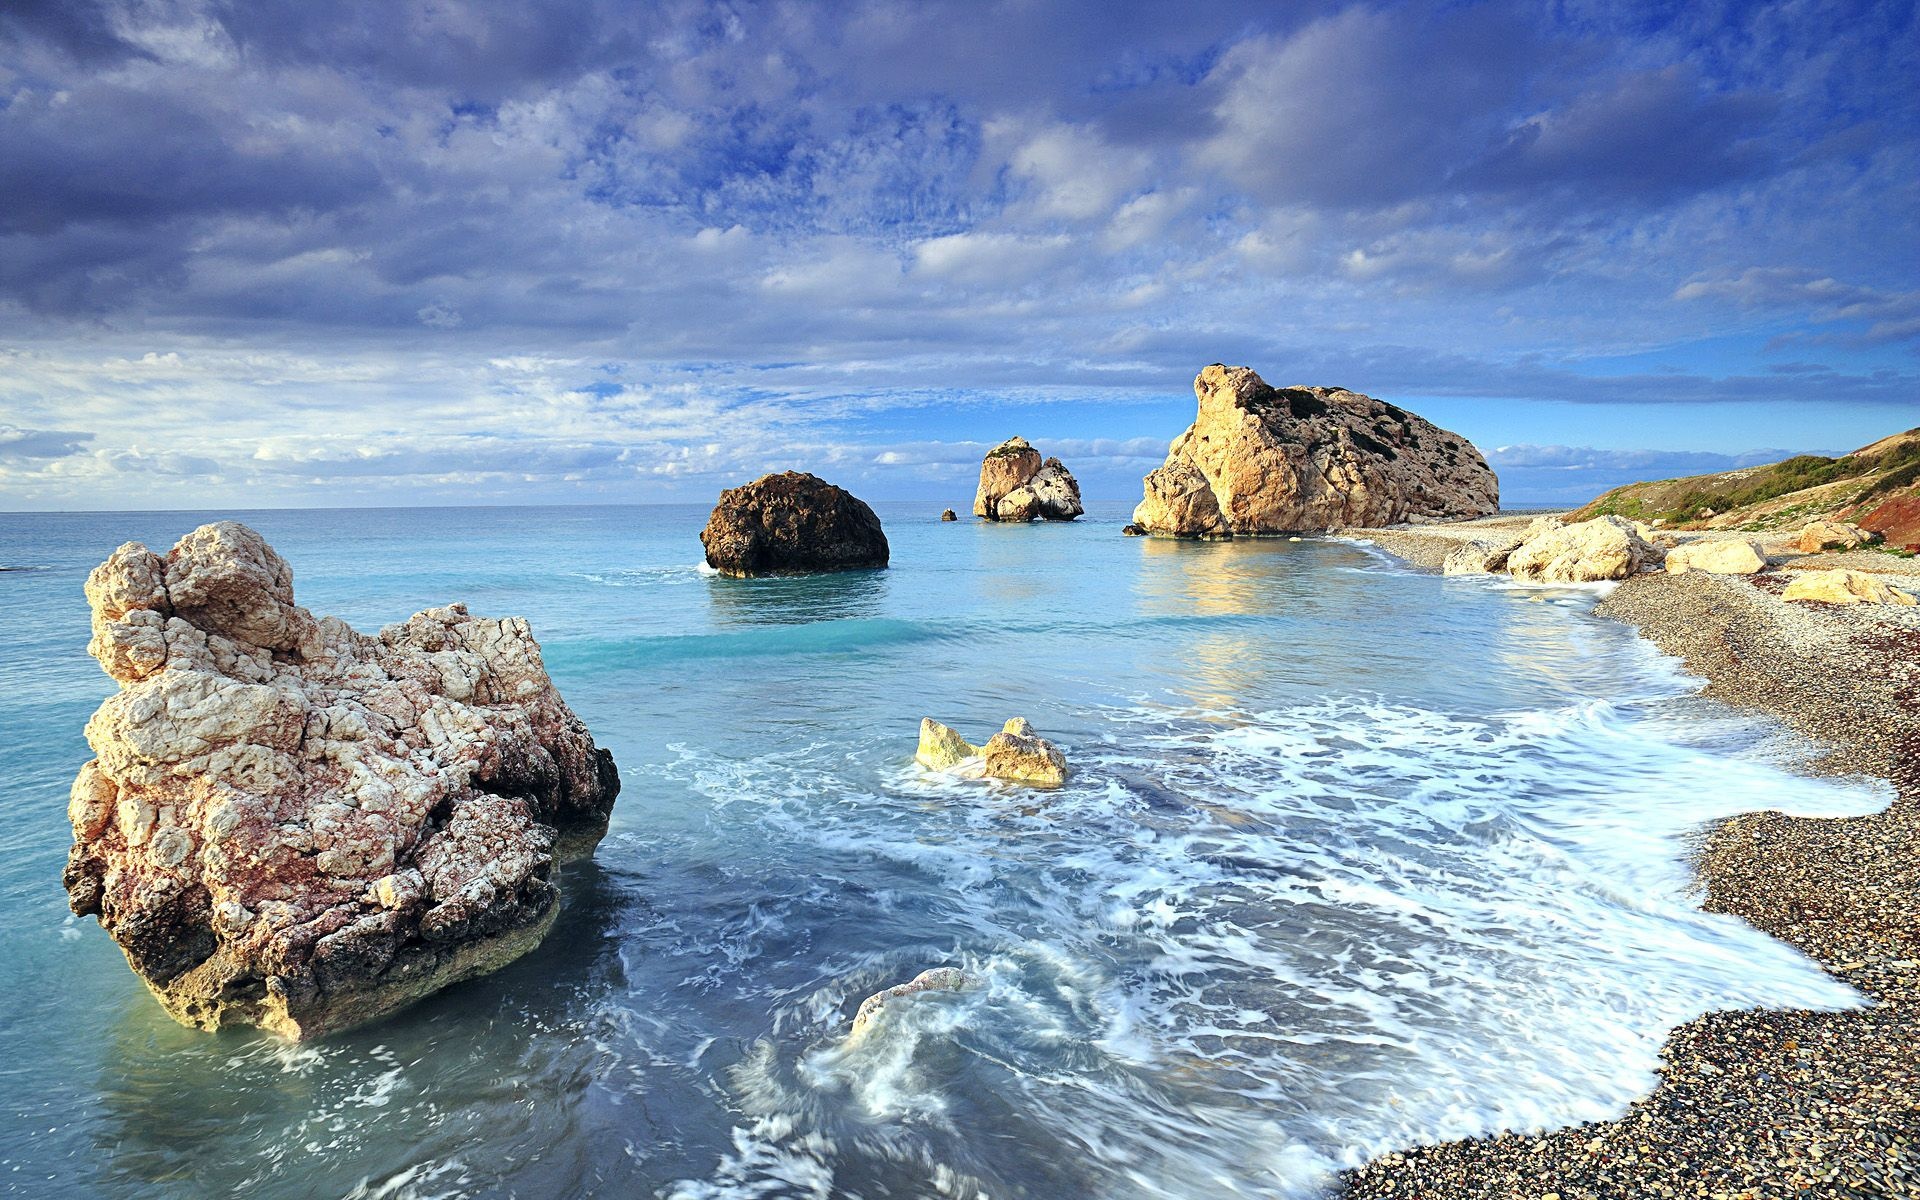 Cyprus wallpapers, Varied collection, Stunning views, Aesthetic appeal, 1920x1200 HD Desktop